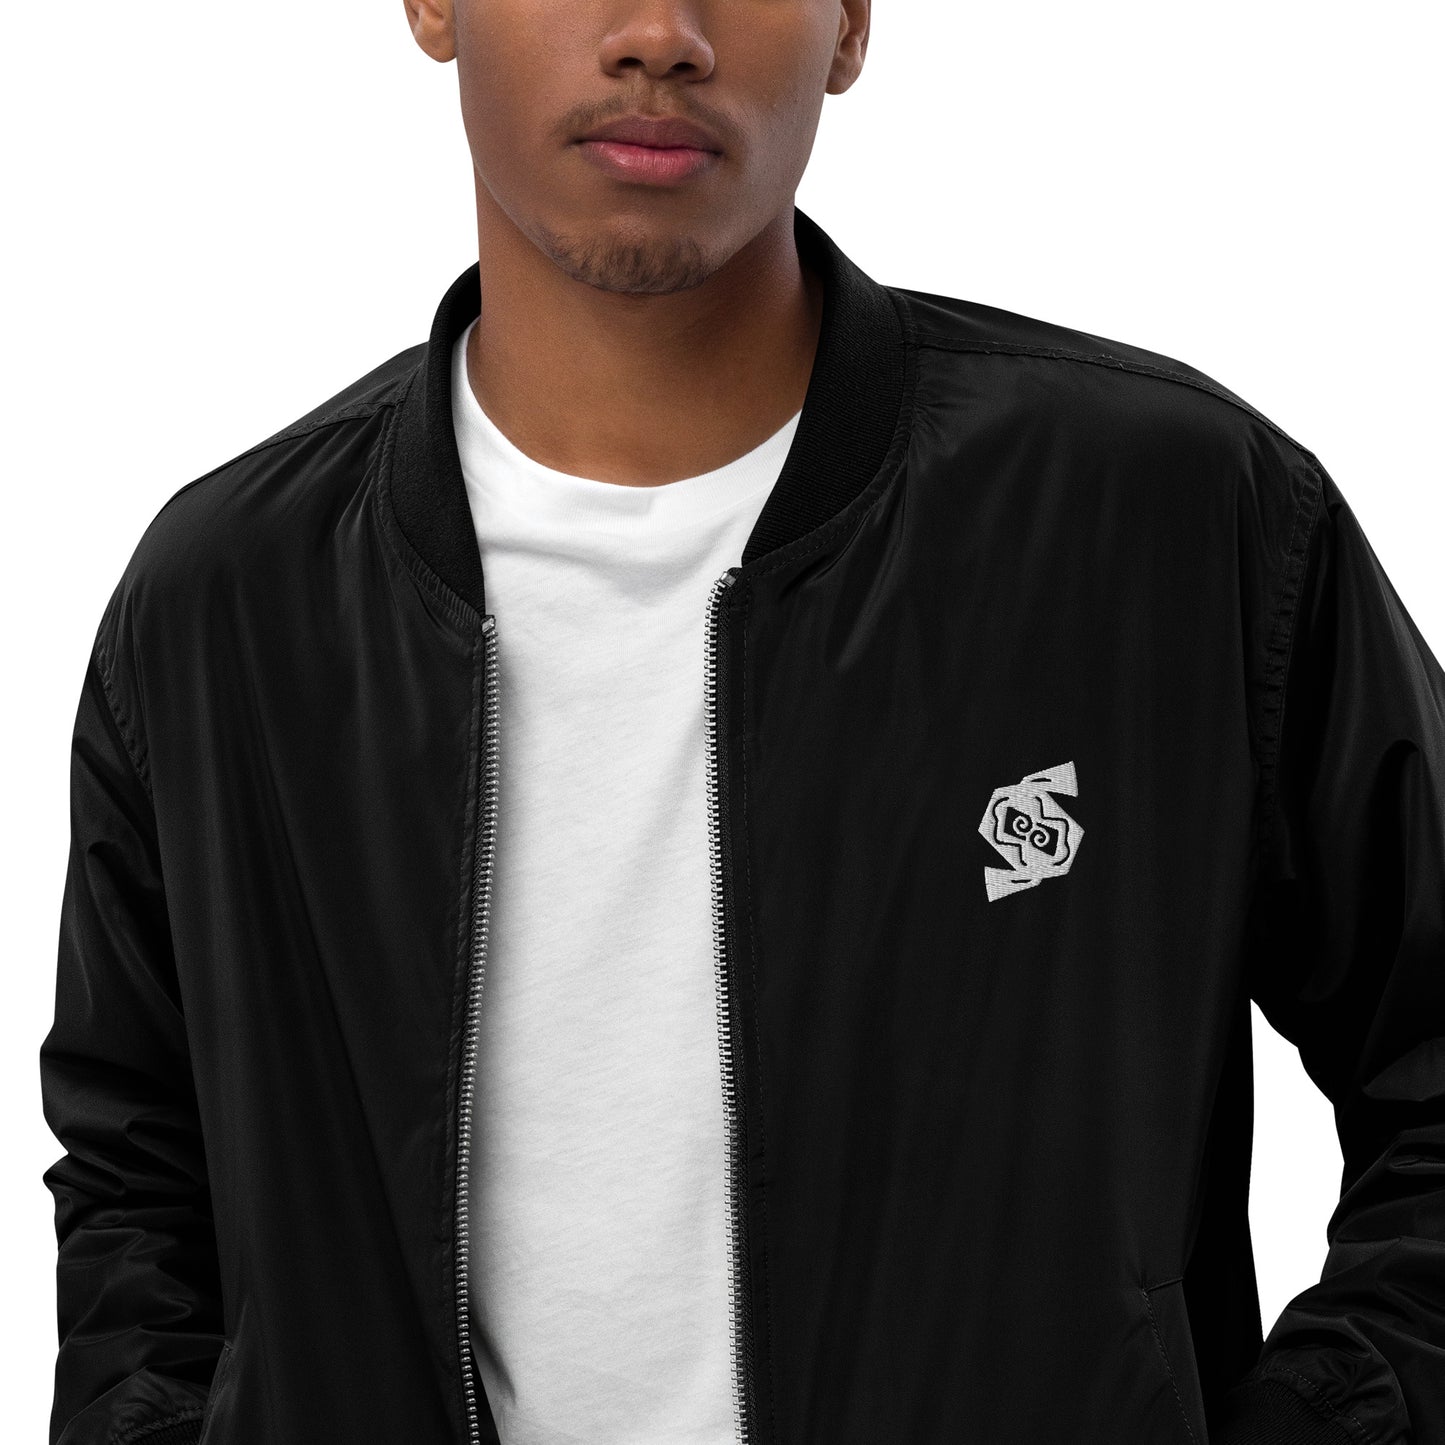 SANSE™ Brand recycled bomber jacket (Personalize me!)